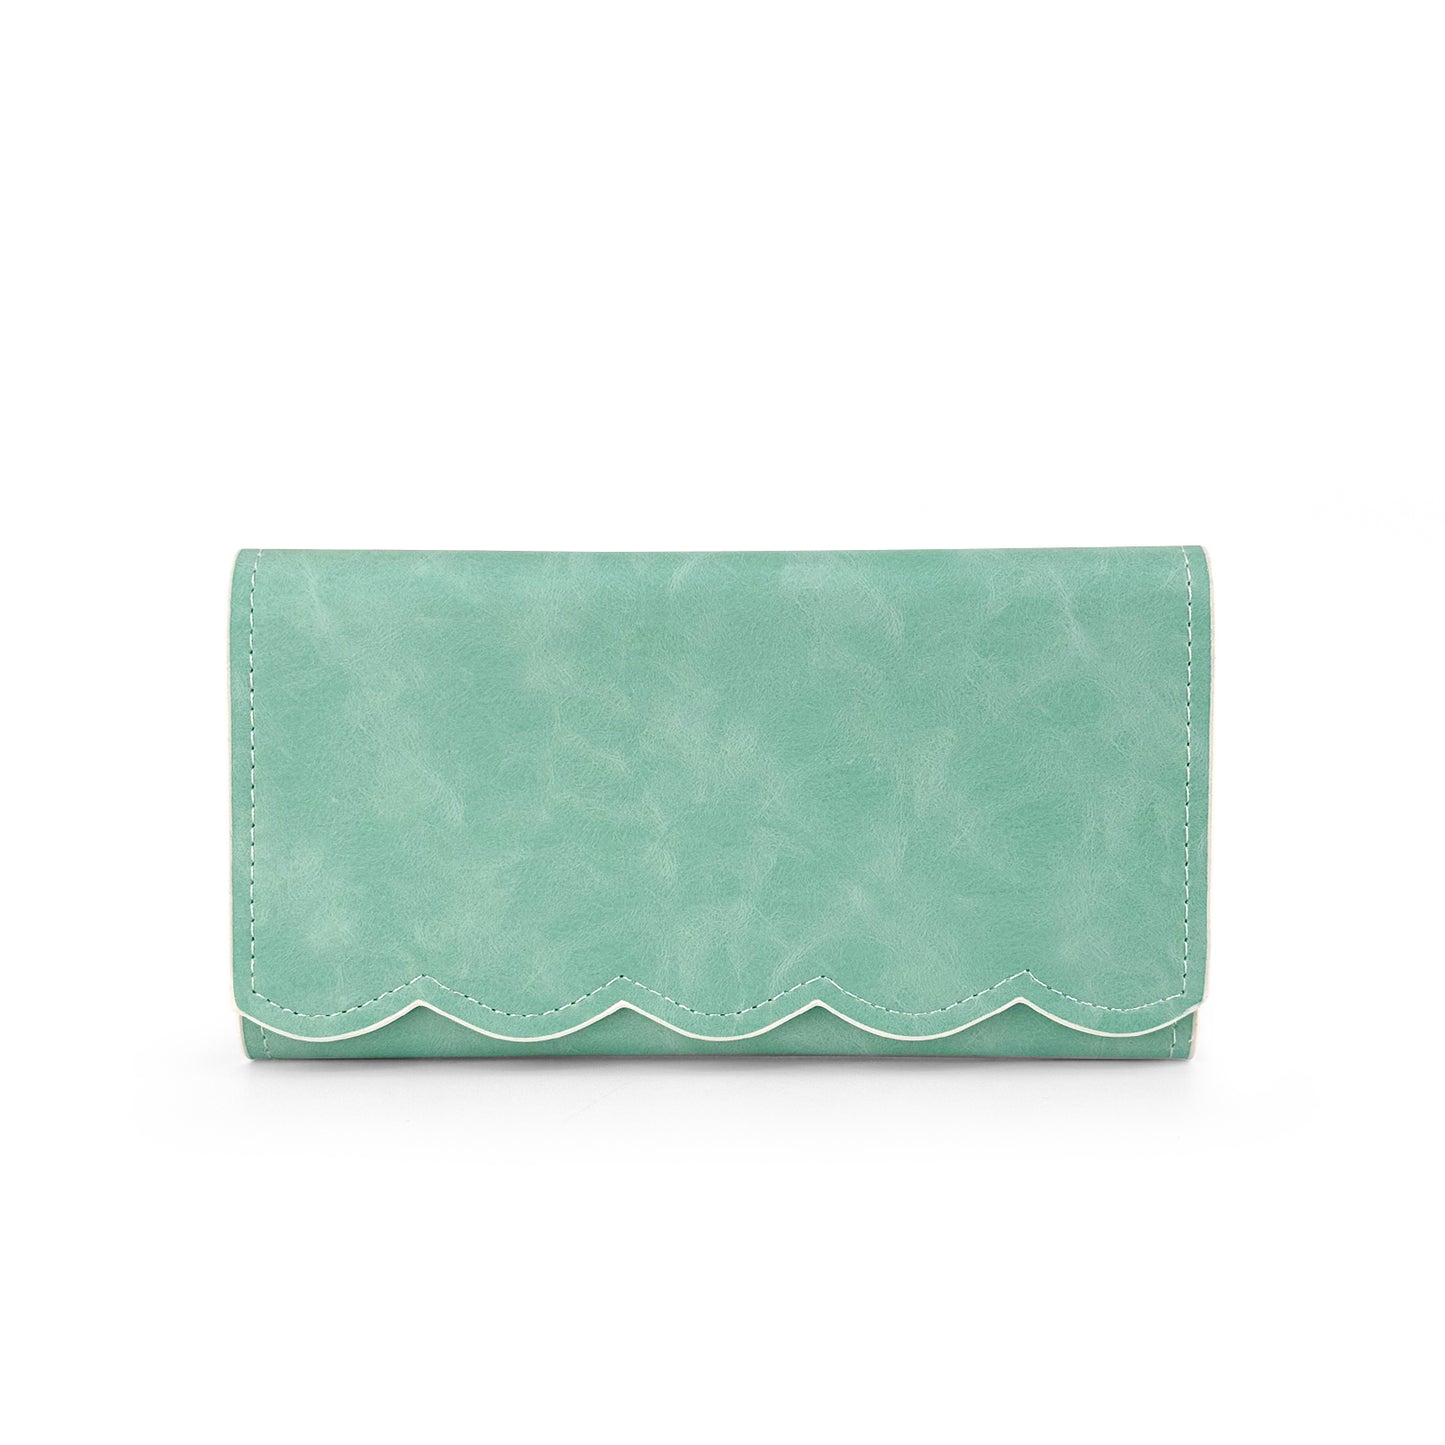 25Pcs Scalloped Wallets Mint Clutch Bags Envelope Purse With Scalloped Bag